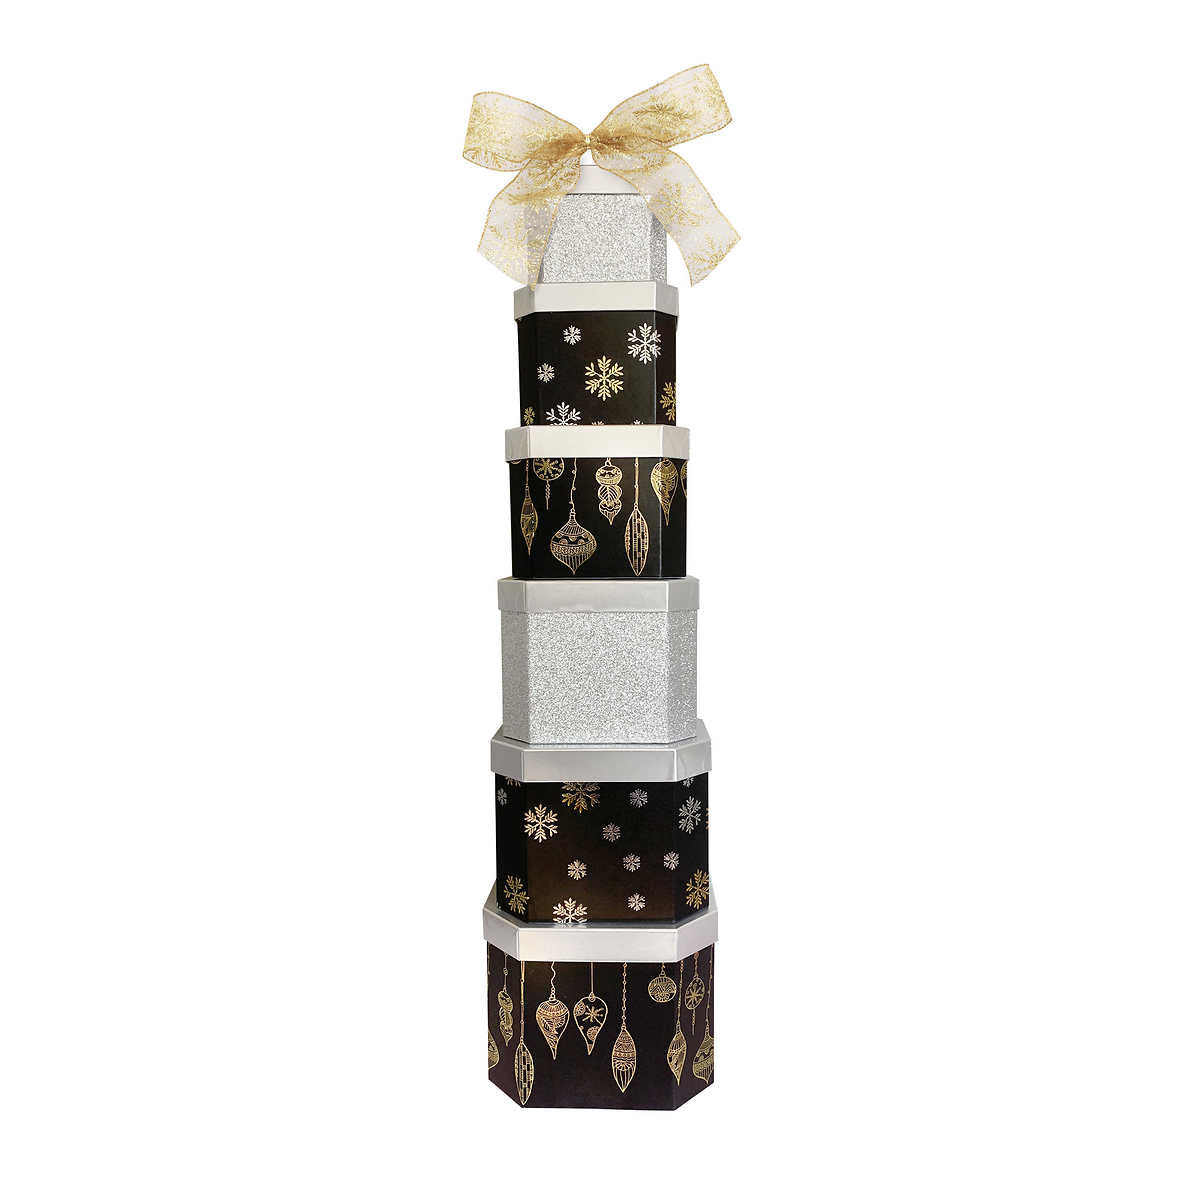 OVAL TREAT TOWER GIFT SET